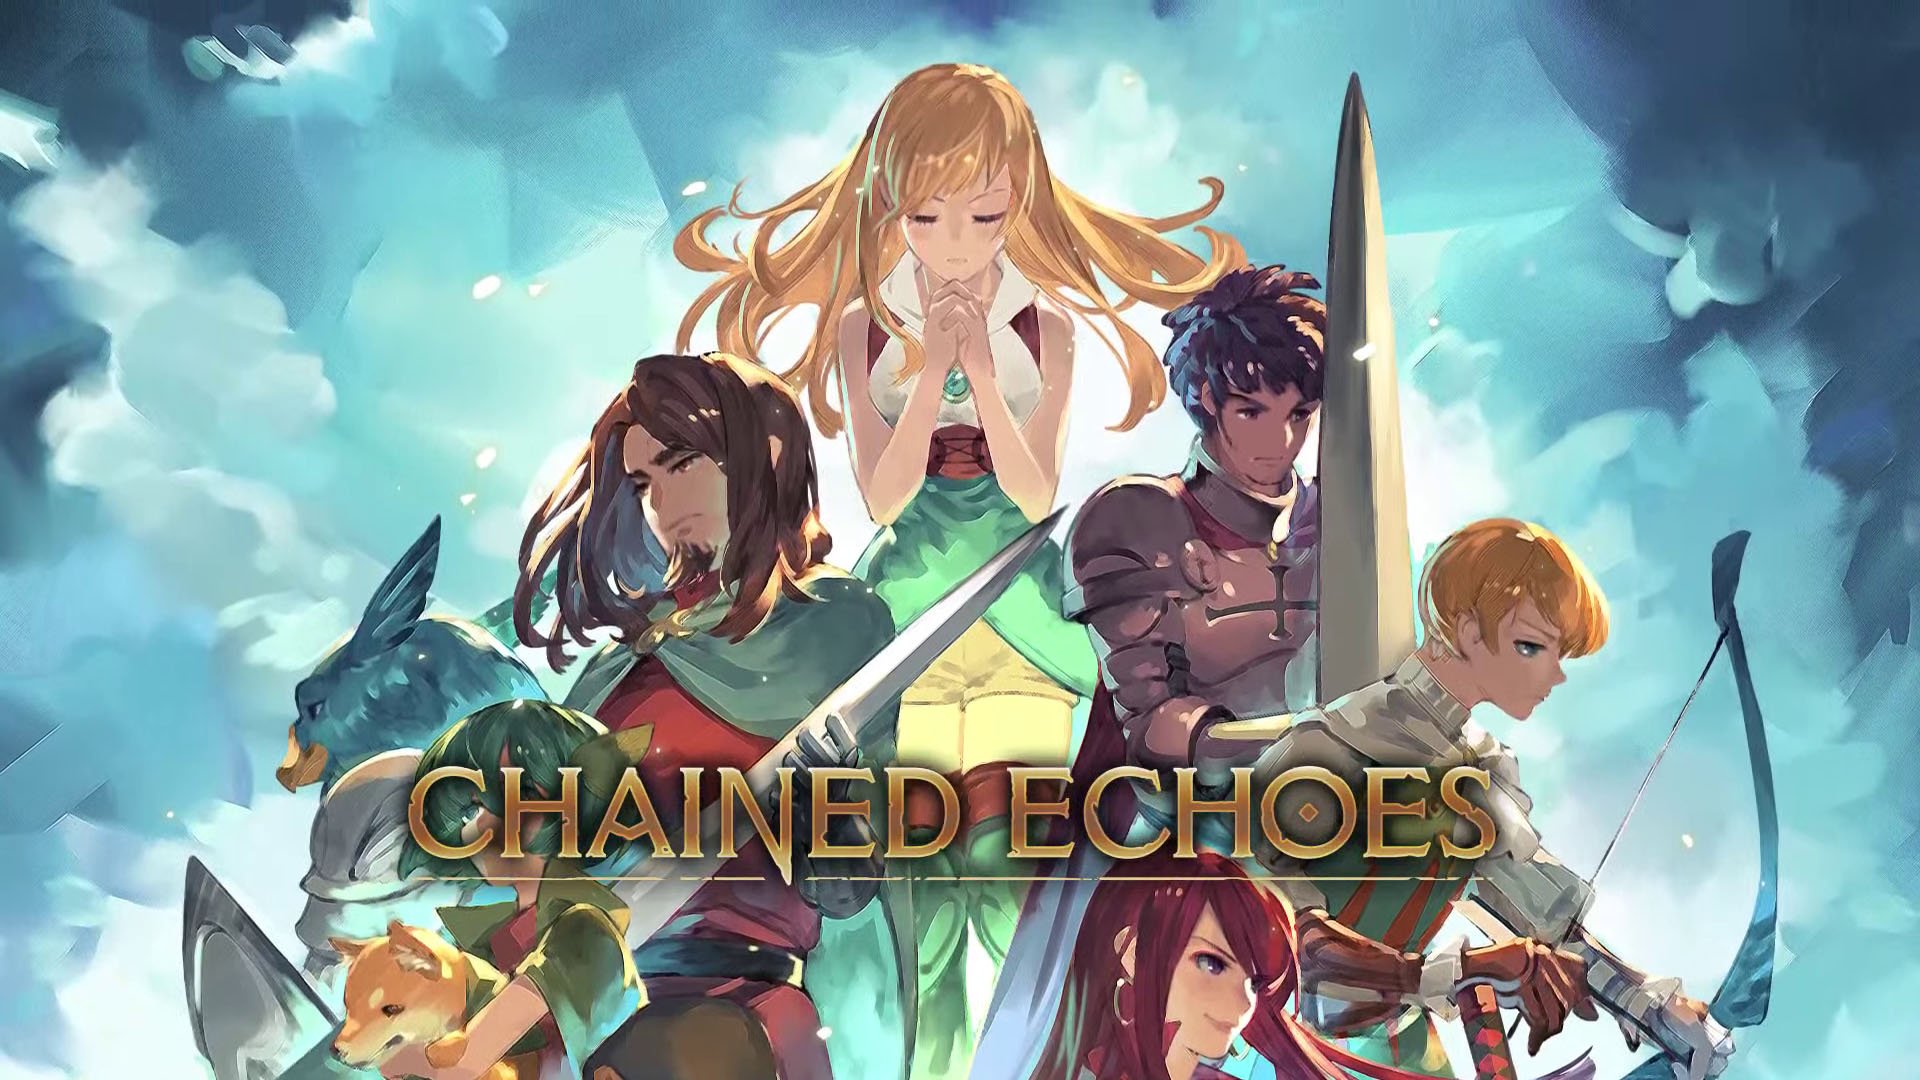 Chained Echoes PlayStation 4 Regular Edition – First Press Games